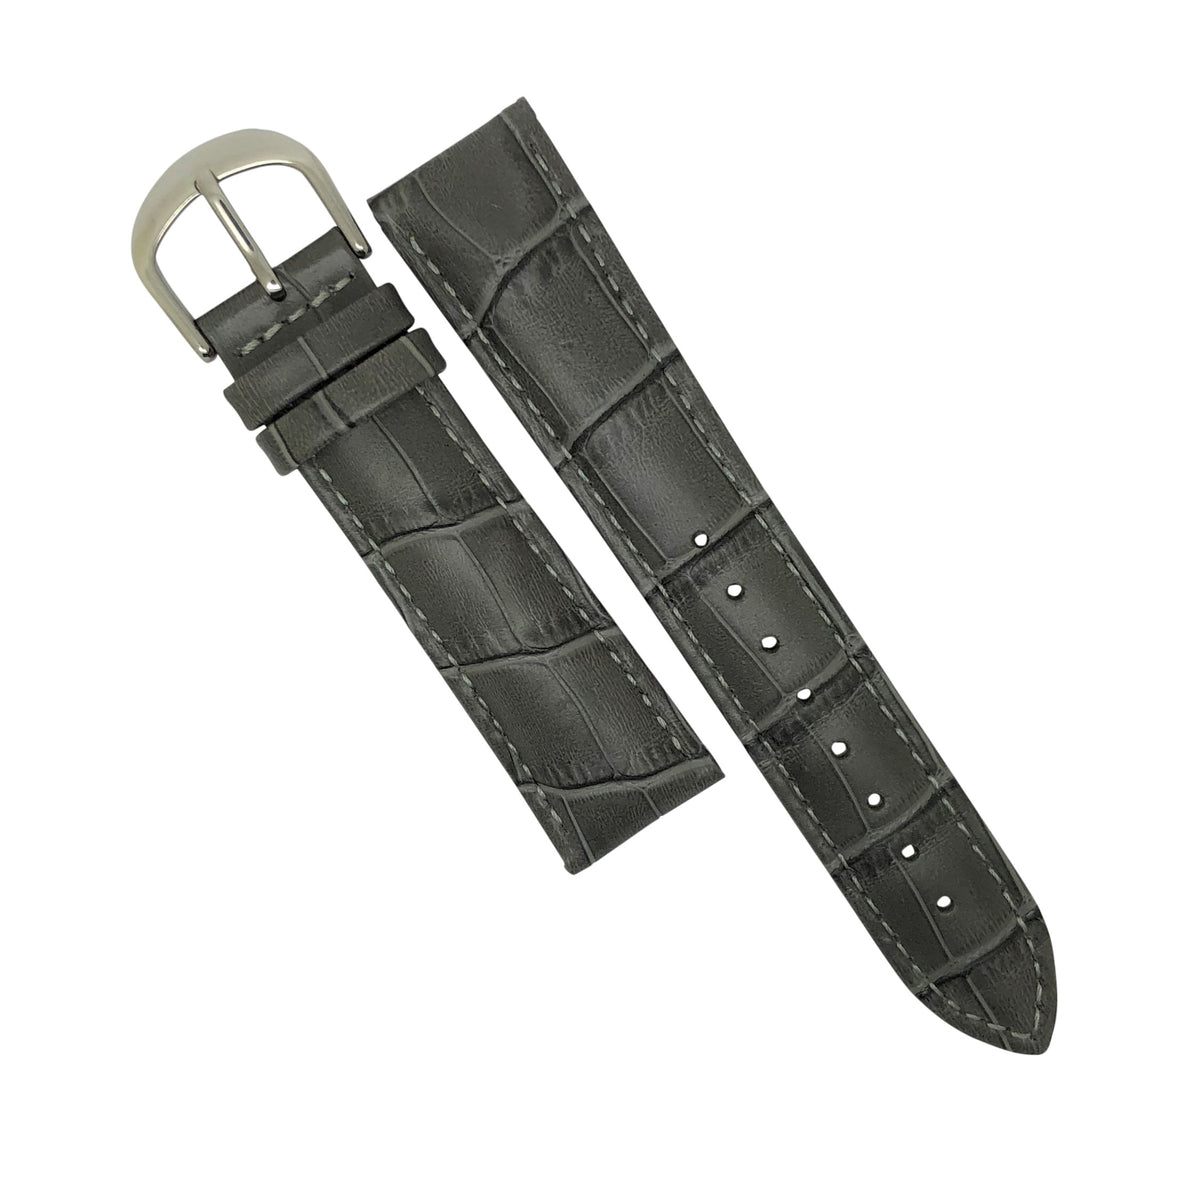 Genuine Croc Pattern Stitched Leather Watch Strap in Grey with Silver Buckle (12mm) - Nomad Watch Works Malaysia